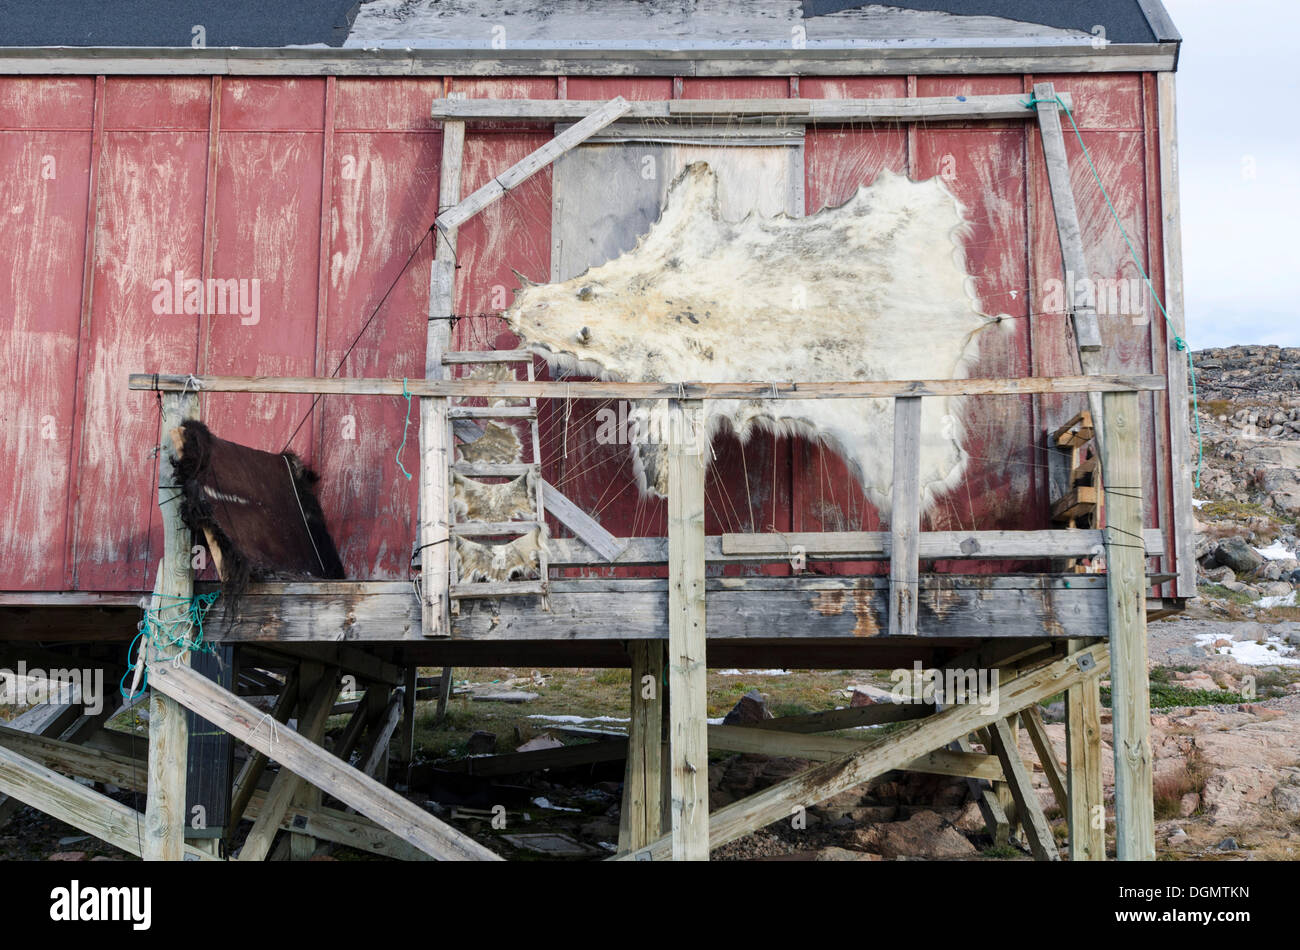 Polar bear skin drying on a frame outside a house in the Ittoqqortoormiit settlement, Scoresbysund, Ostgrönland, Greenland Stock Photo